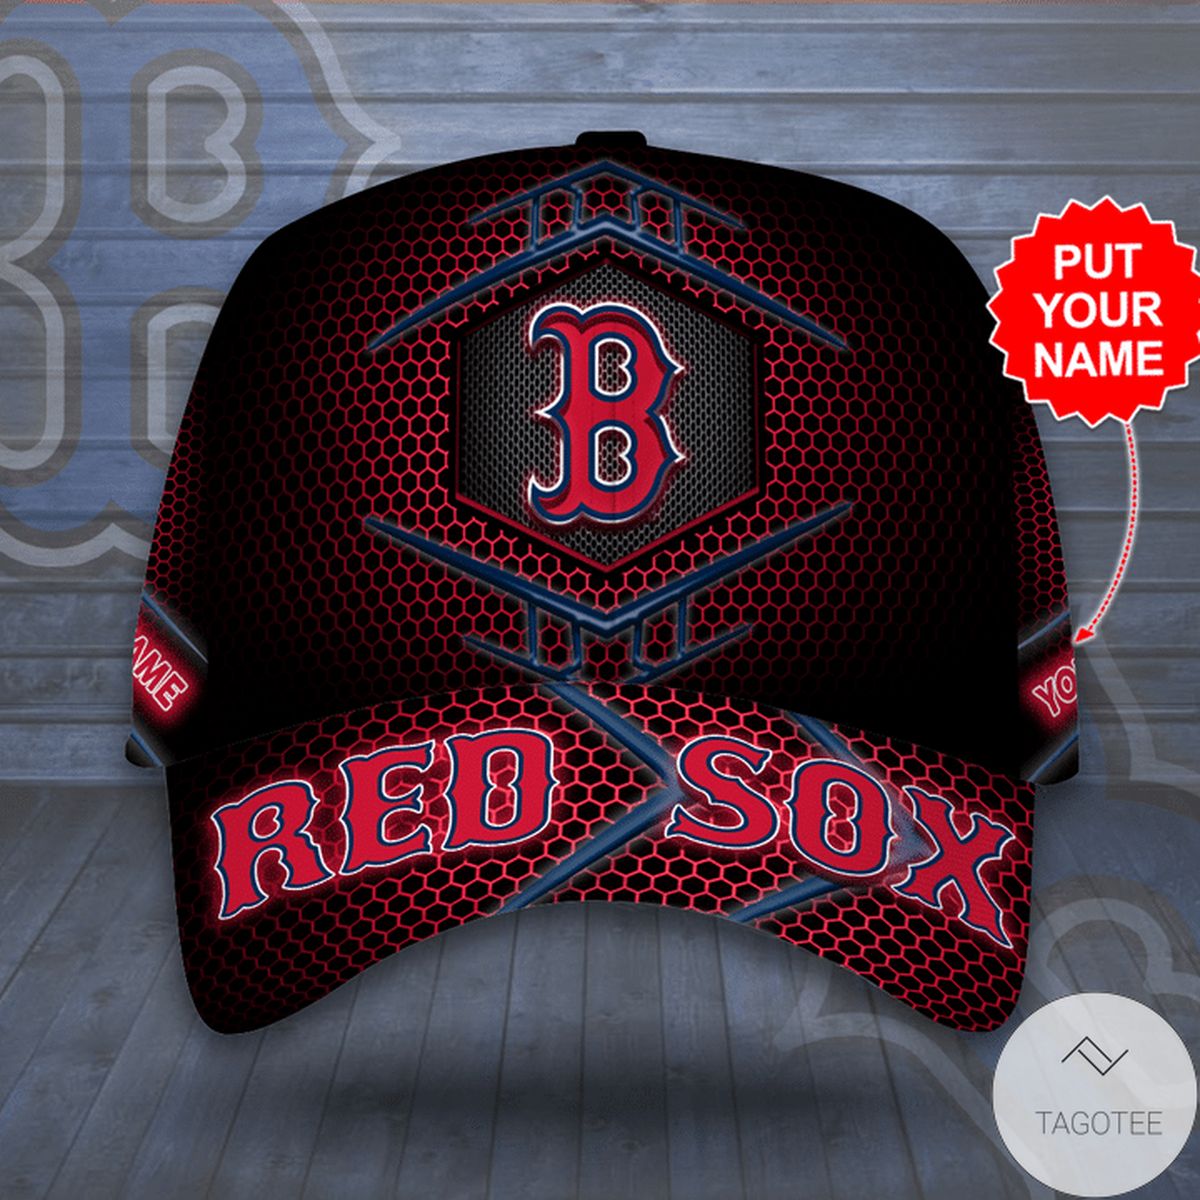 Personalized Boston Red Sox Cap